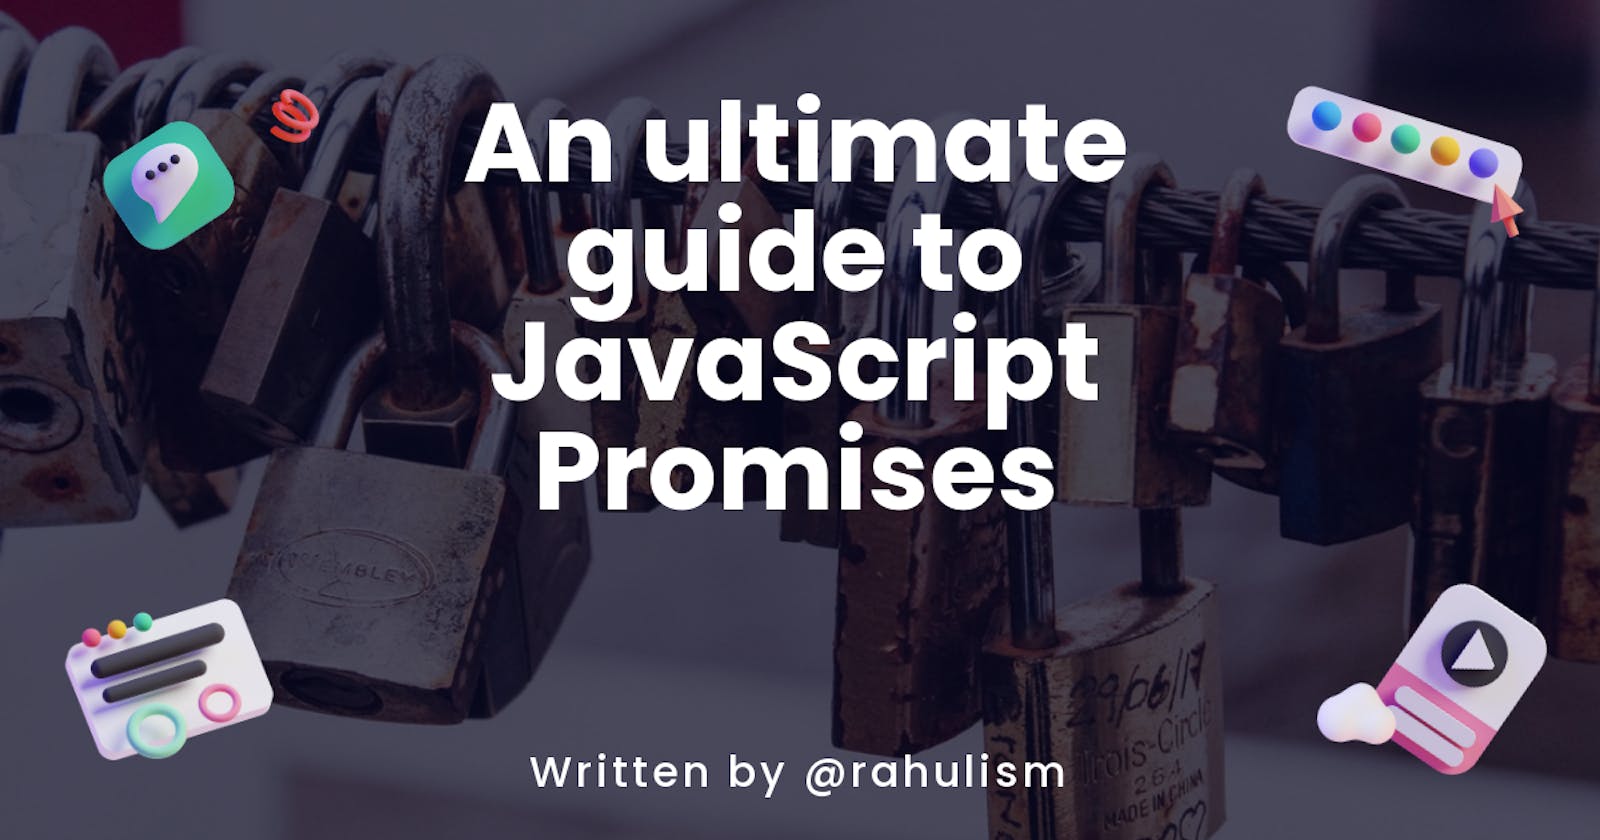 An ultimate guide to JavaScript Promises